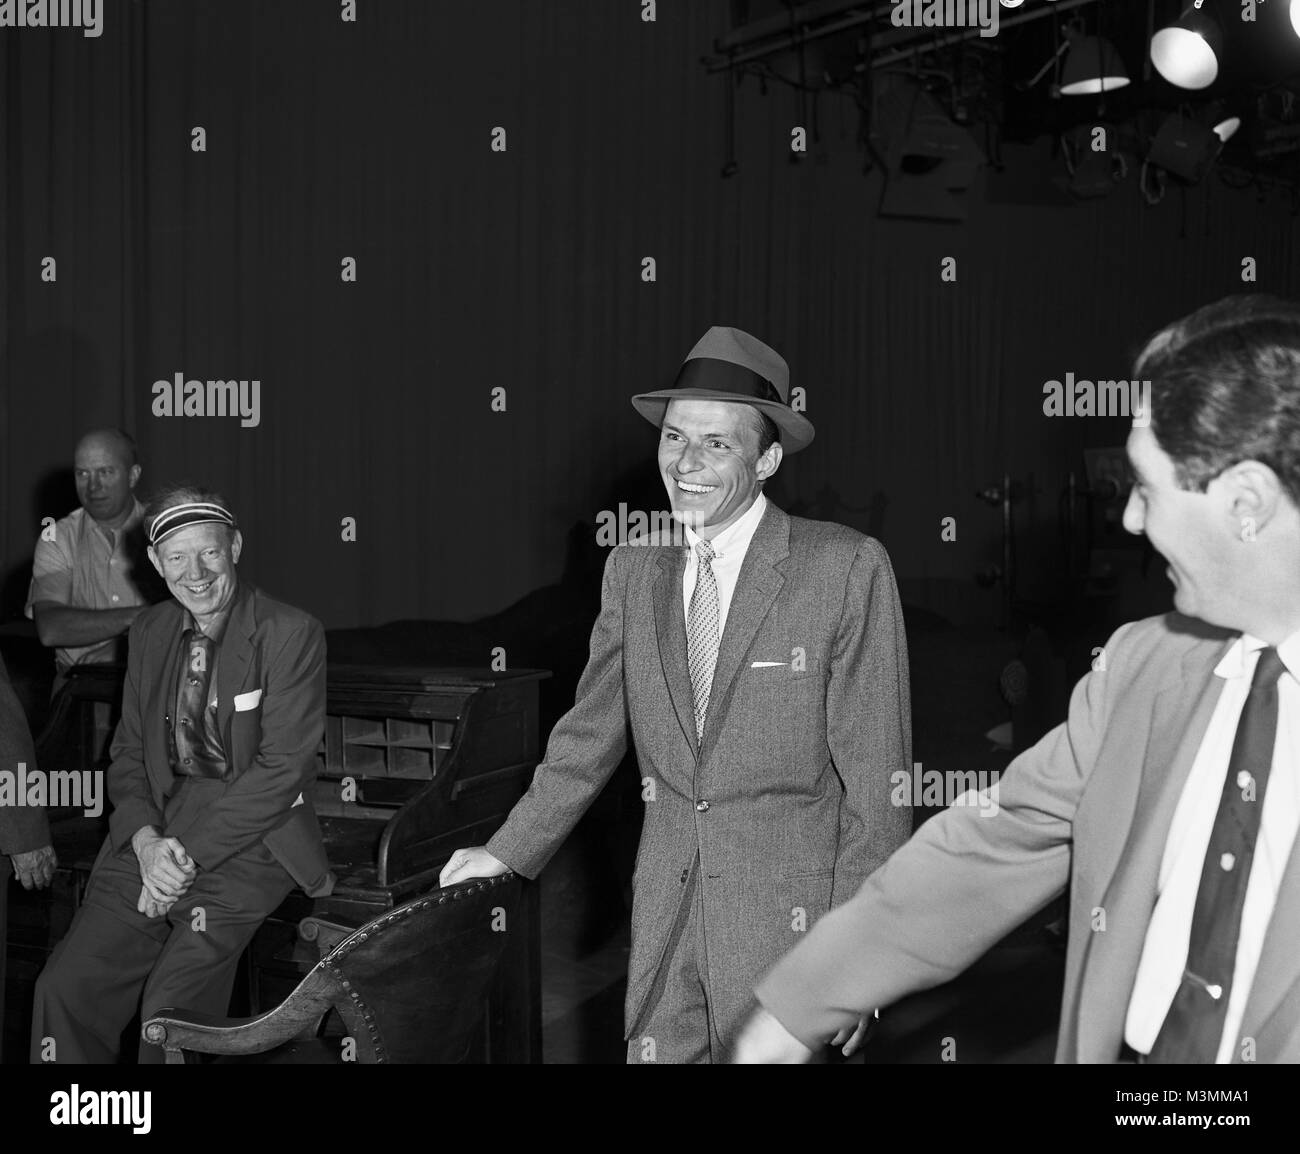 Frank Sinatra on the set of “Our Town”, 1955. Sinatra played the Stage Manager in this musical adaption of the Thornton Wilder play.  In this production, he introduced his well-known signature song, Love and Marriage. Original camera negative. Stock Photo